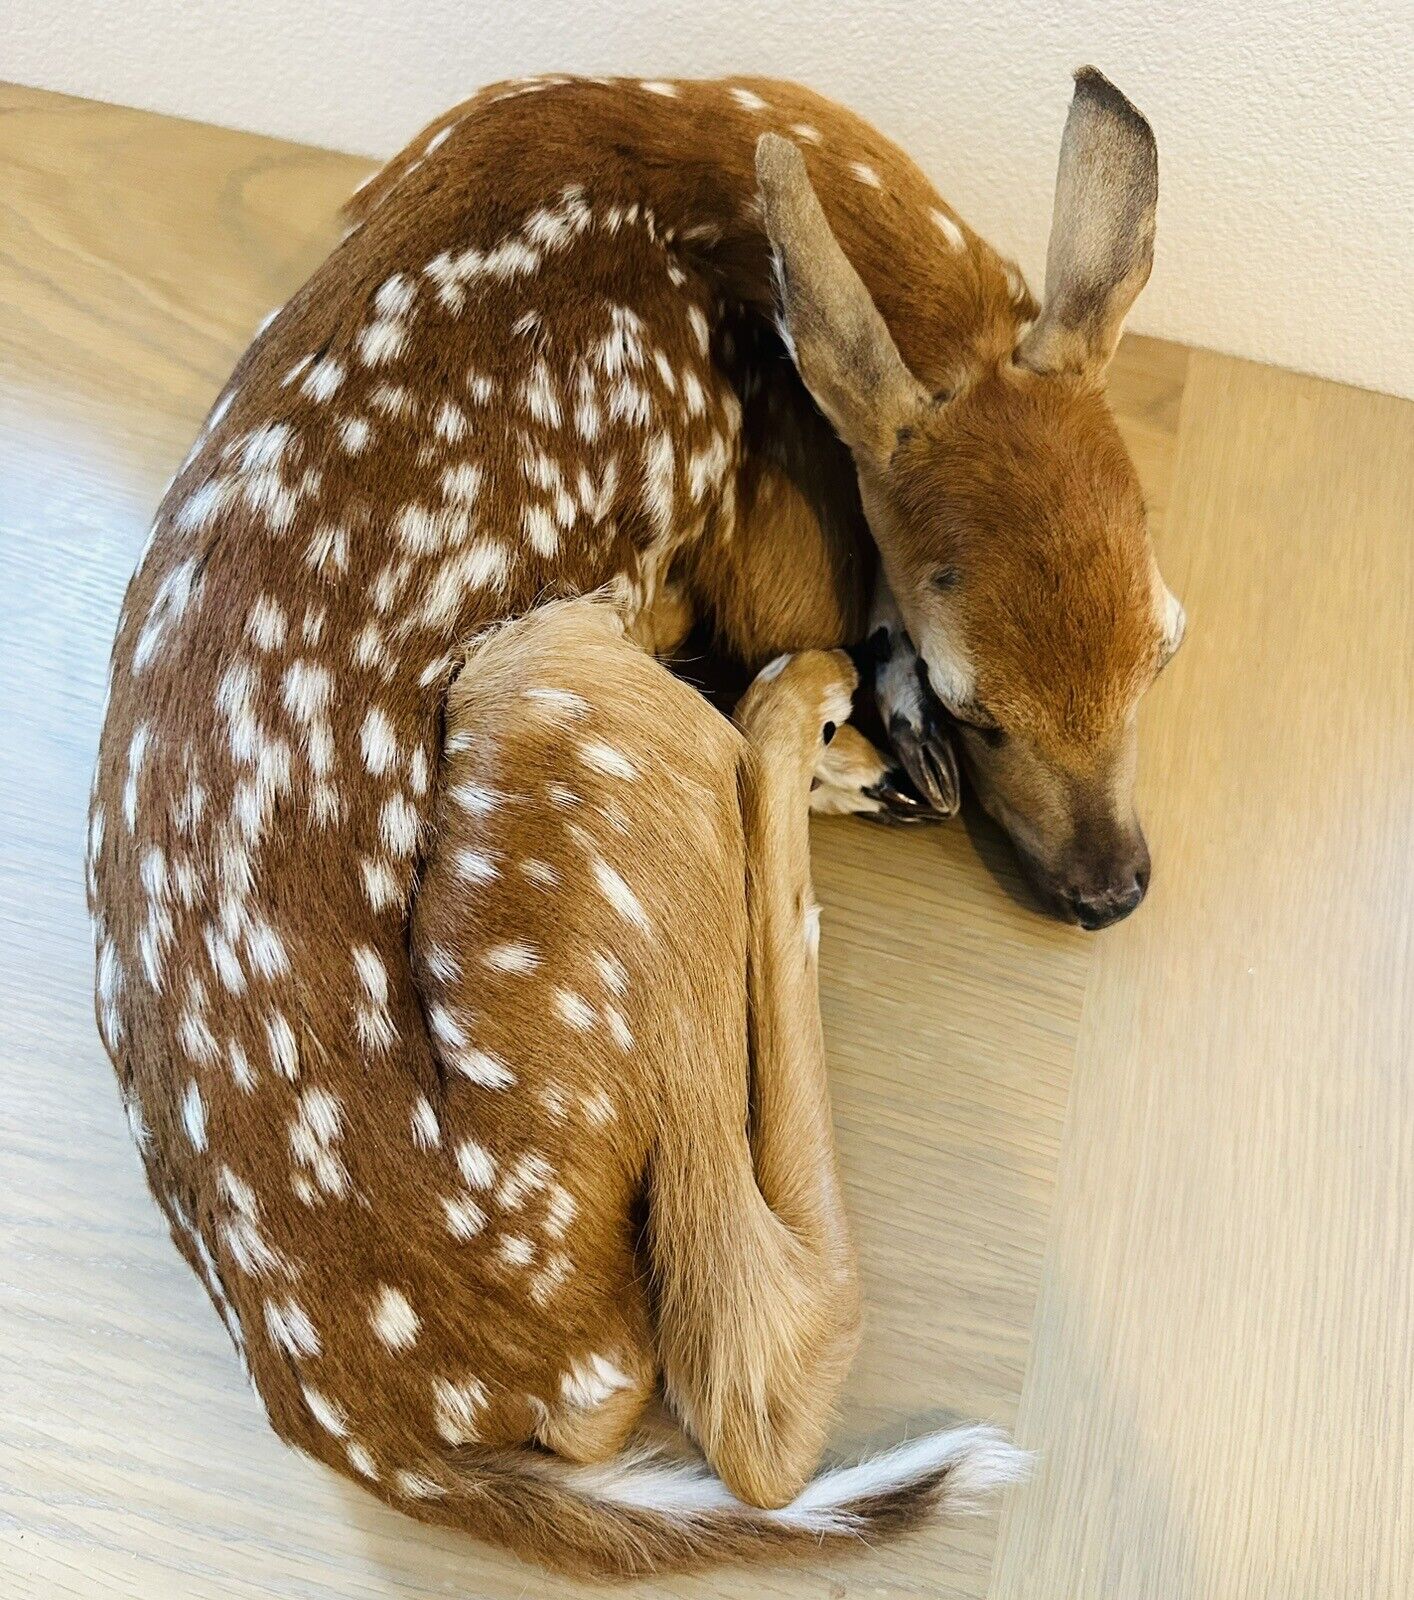 Museum Quality Real Deer Fawn Taxidermy Mount